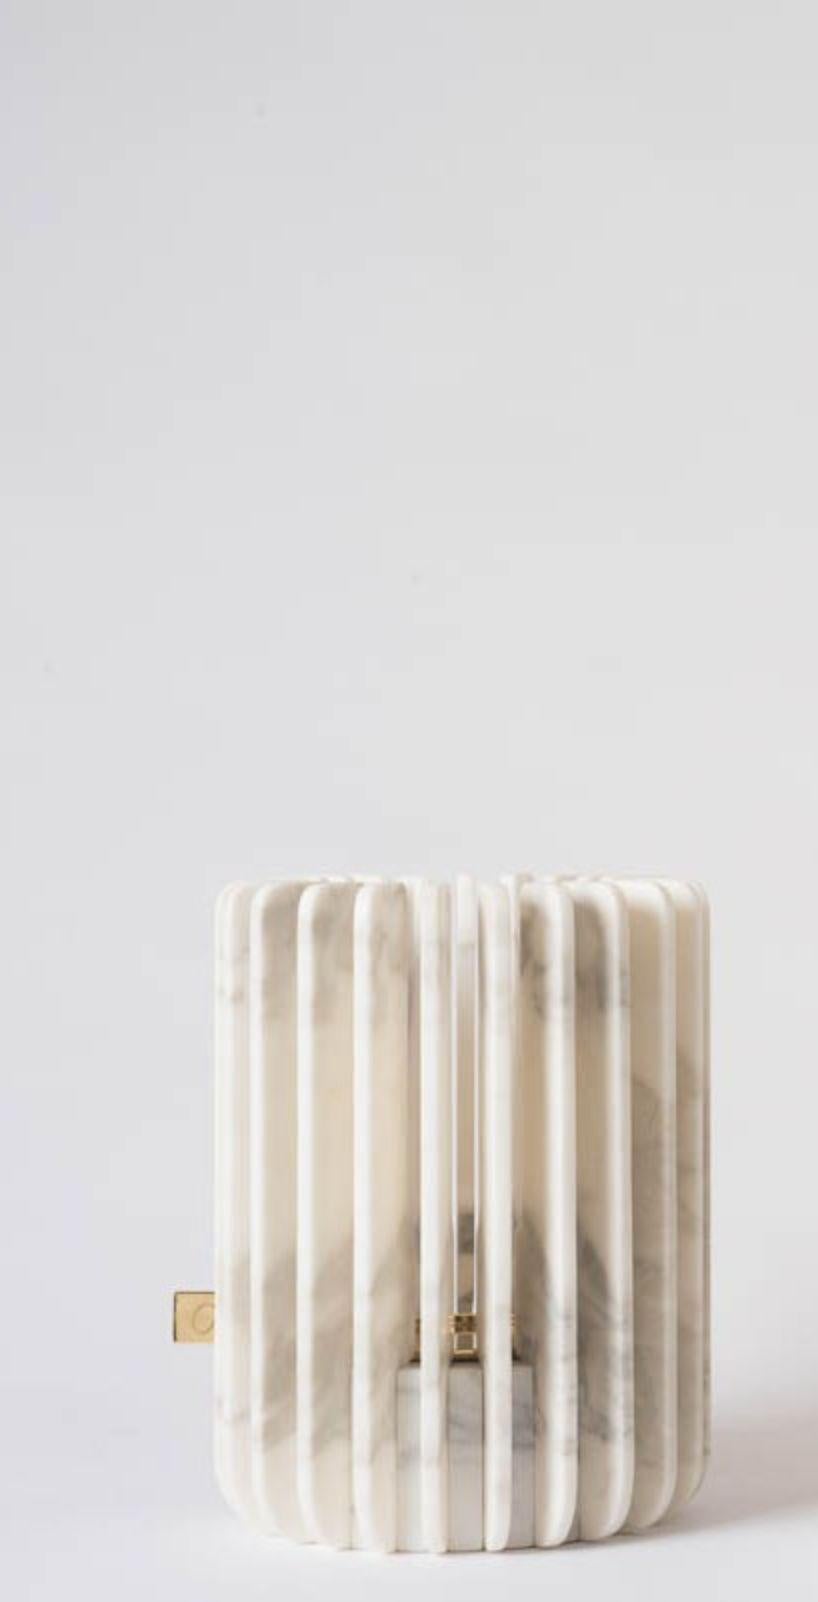 Calacatta Orion candleholders by Dan Yeffet
Dimensions: Ø 19.7 x H 25 cm 
Materials: Marble 

Size available: 
Ø 18.7 x H 12 cm 
Ø 19.7 x H 25 cm 
Ø 32 x H 12 cm 

Marble available: 
Marquina
Grey Saint